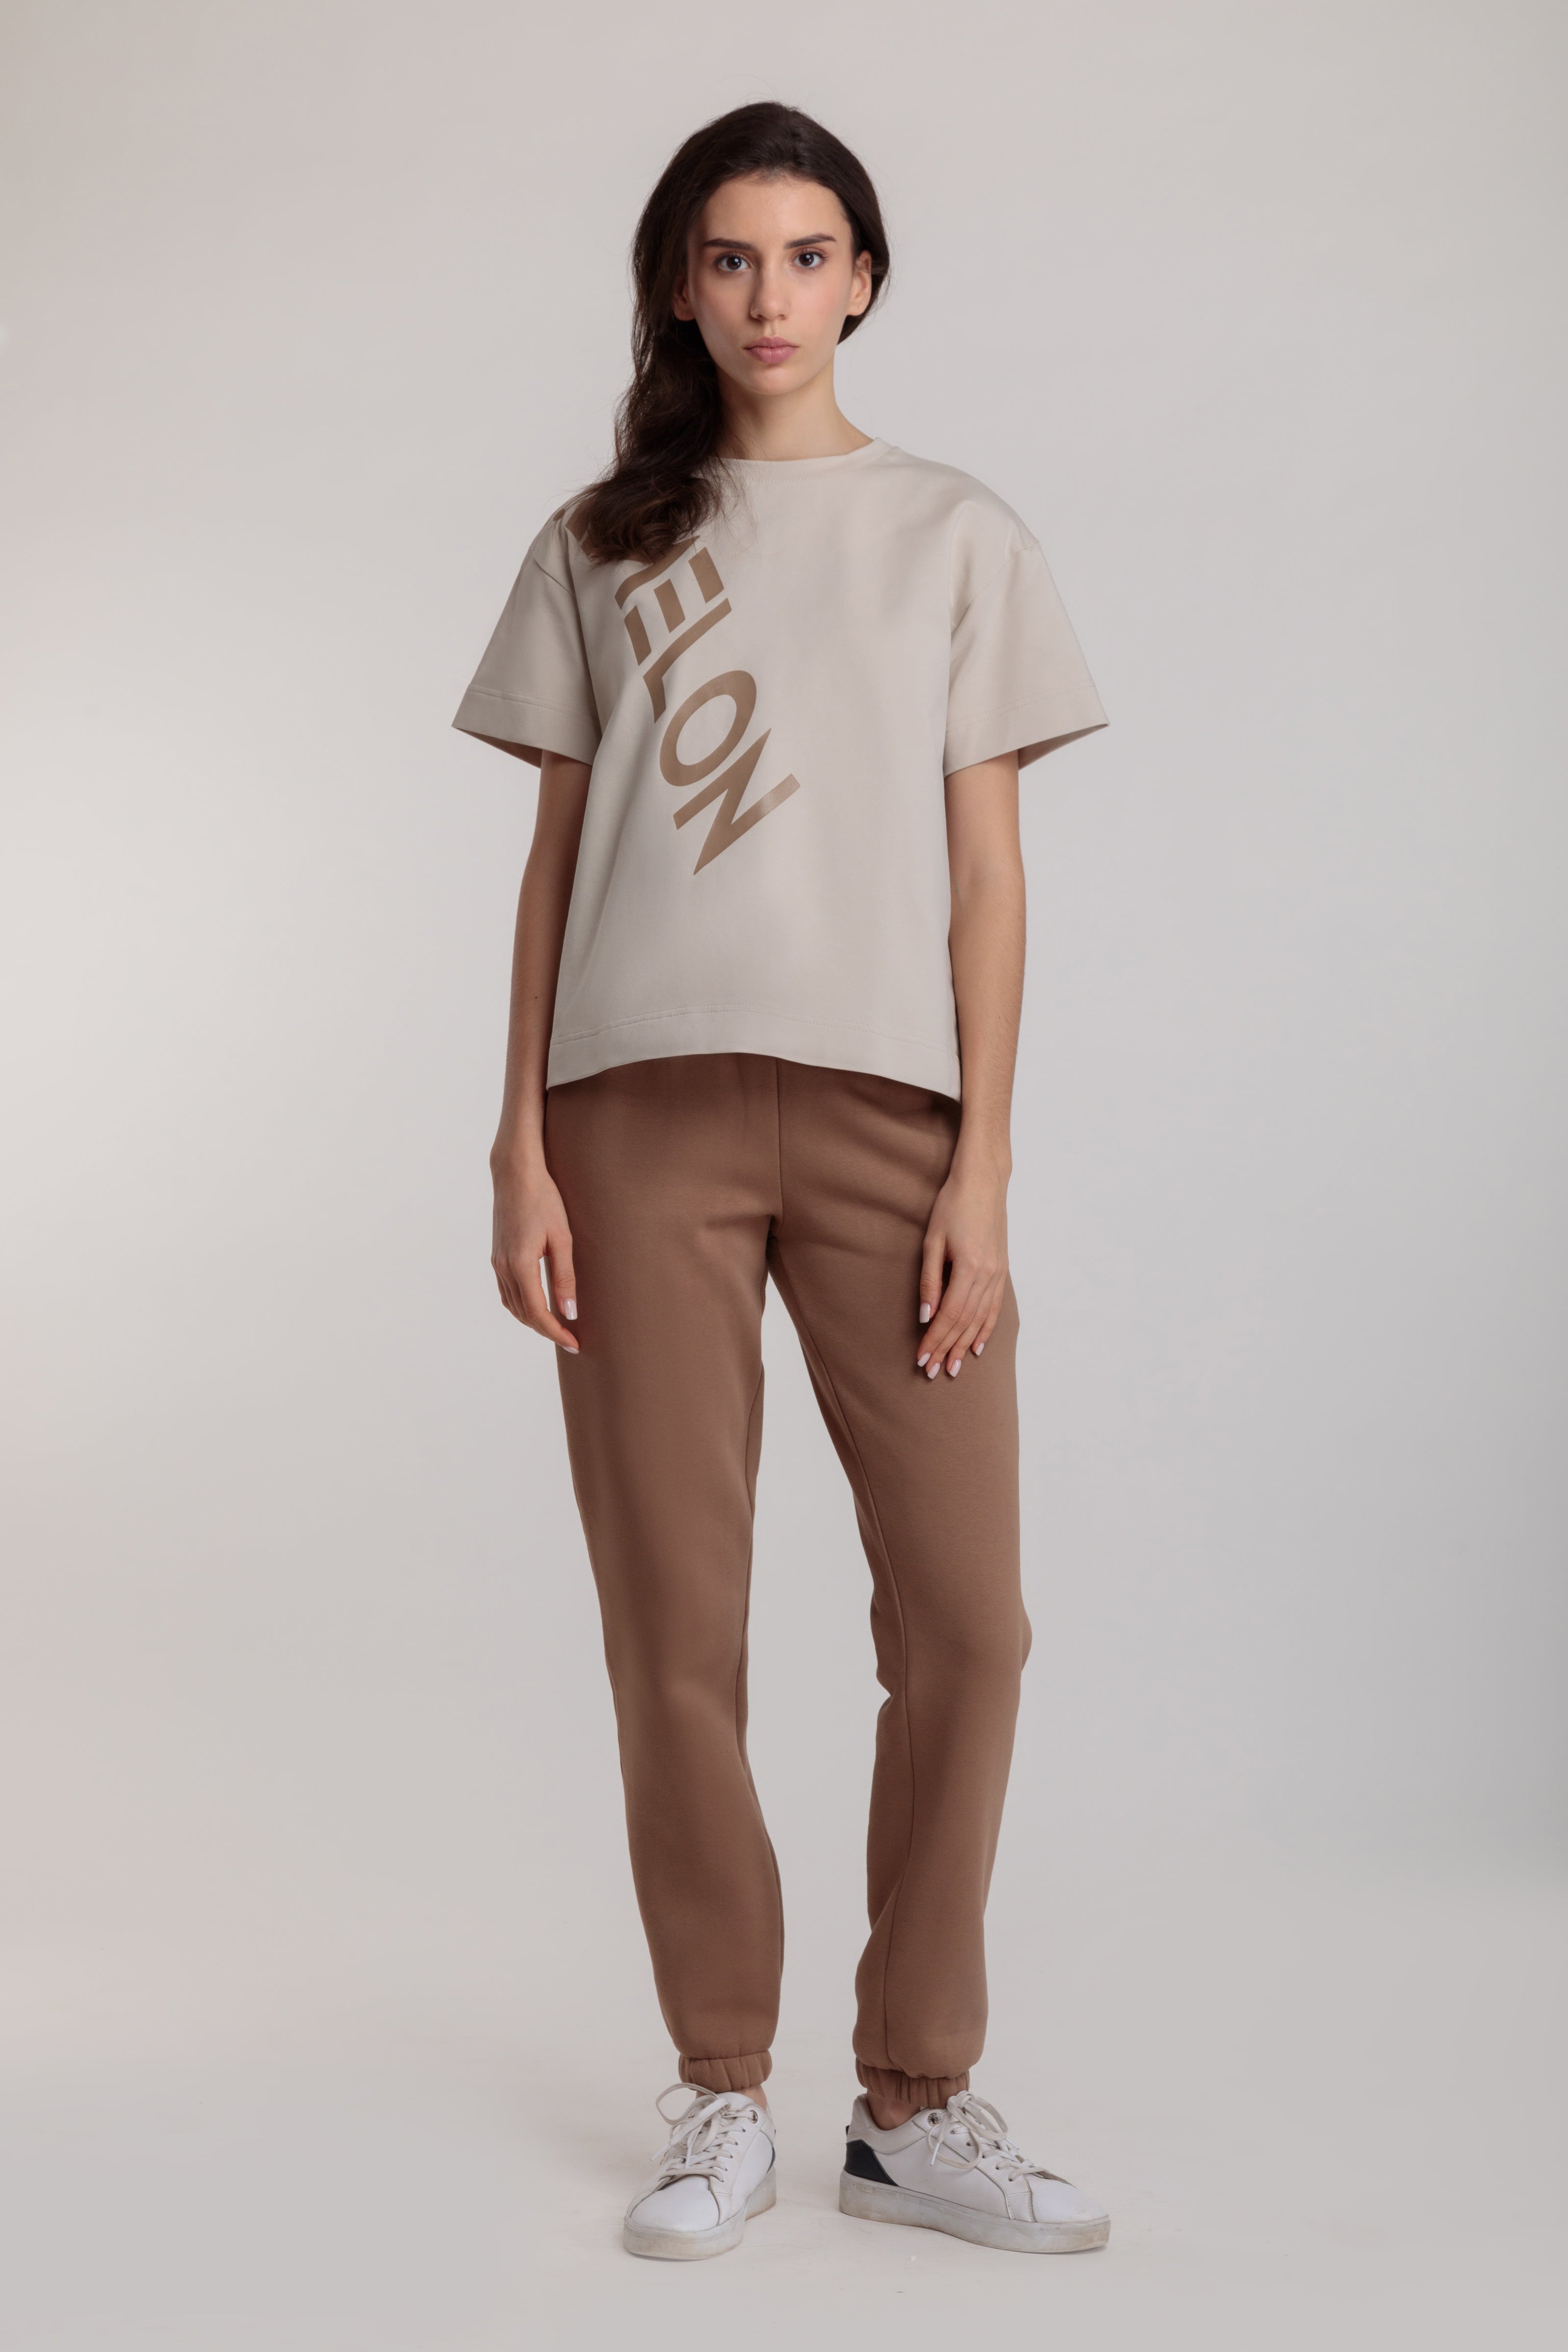 Women's straight milky t-shirt with a large beige lettering